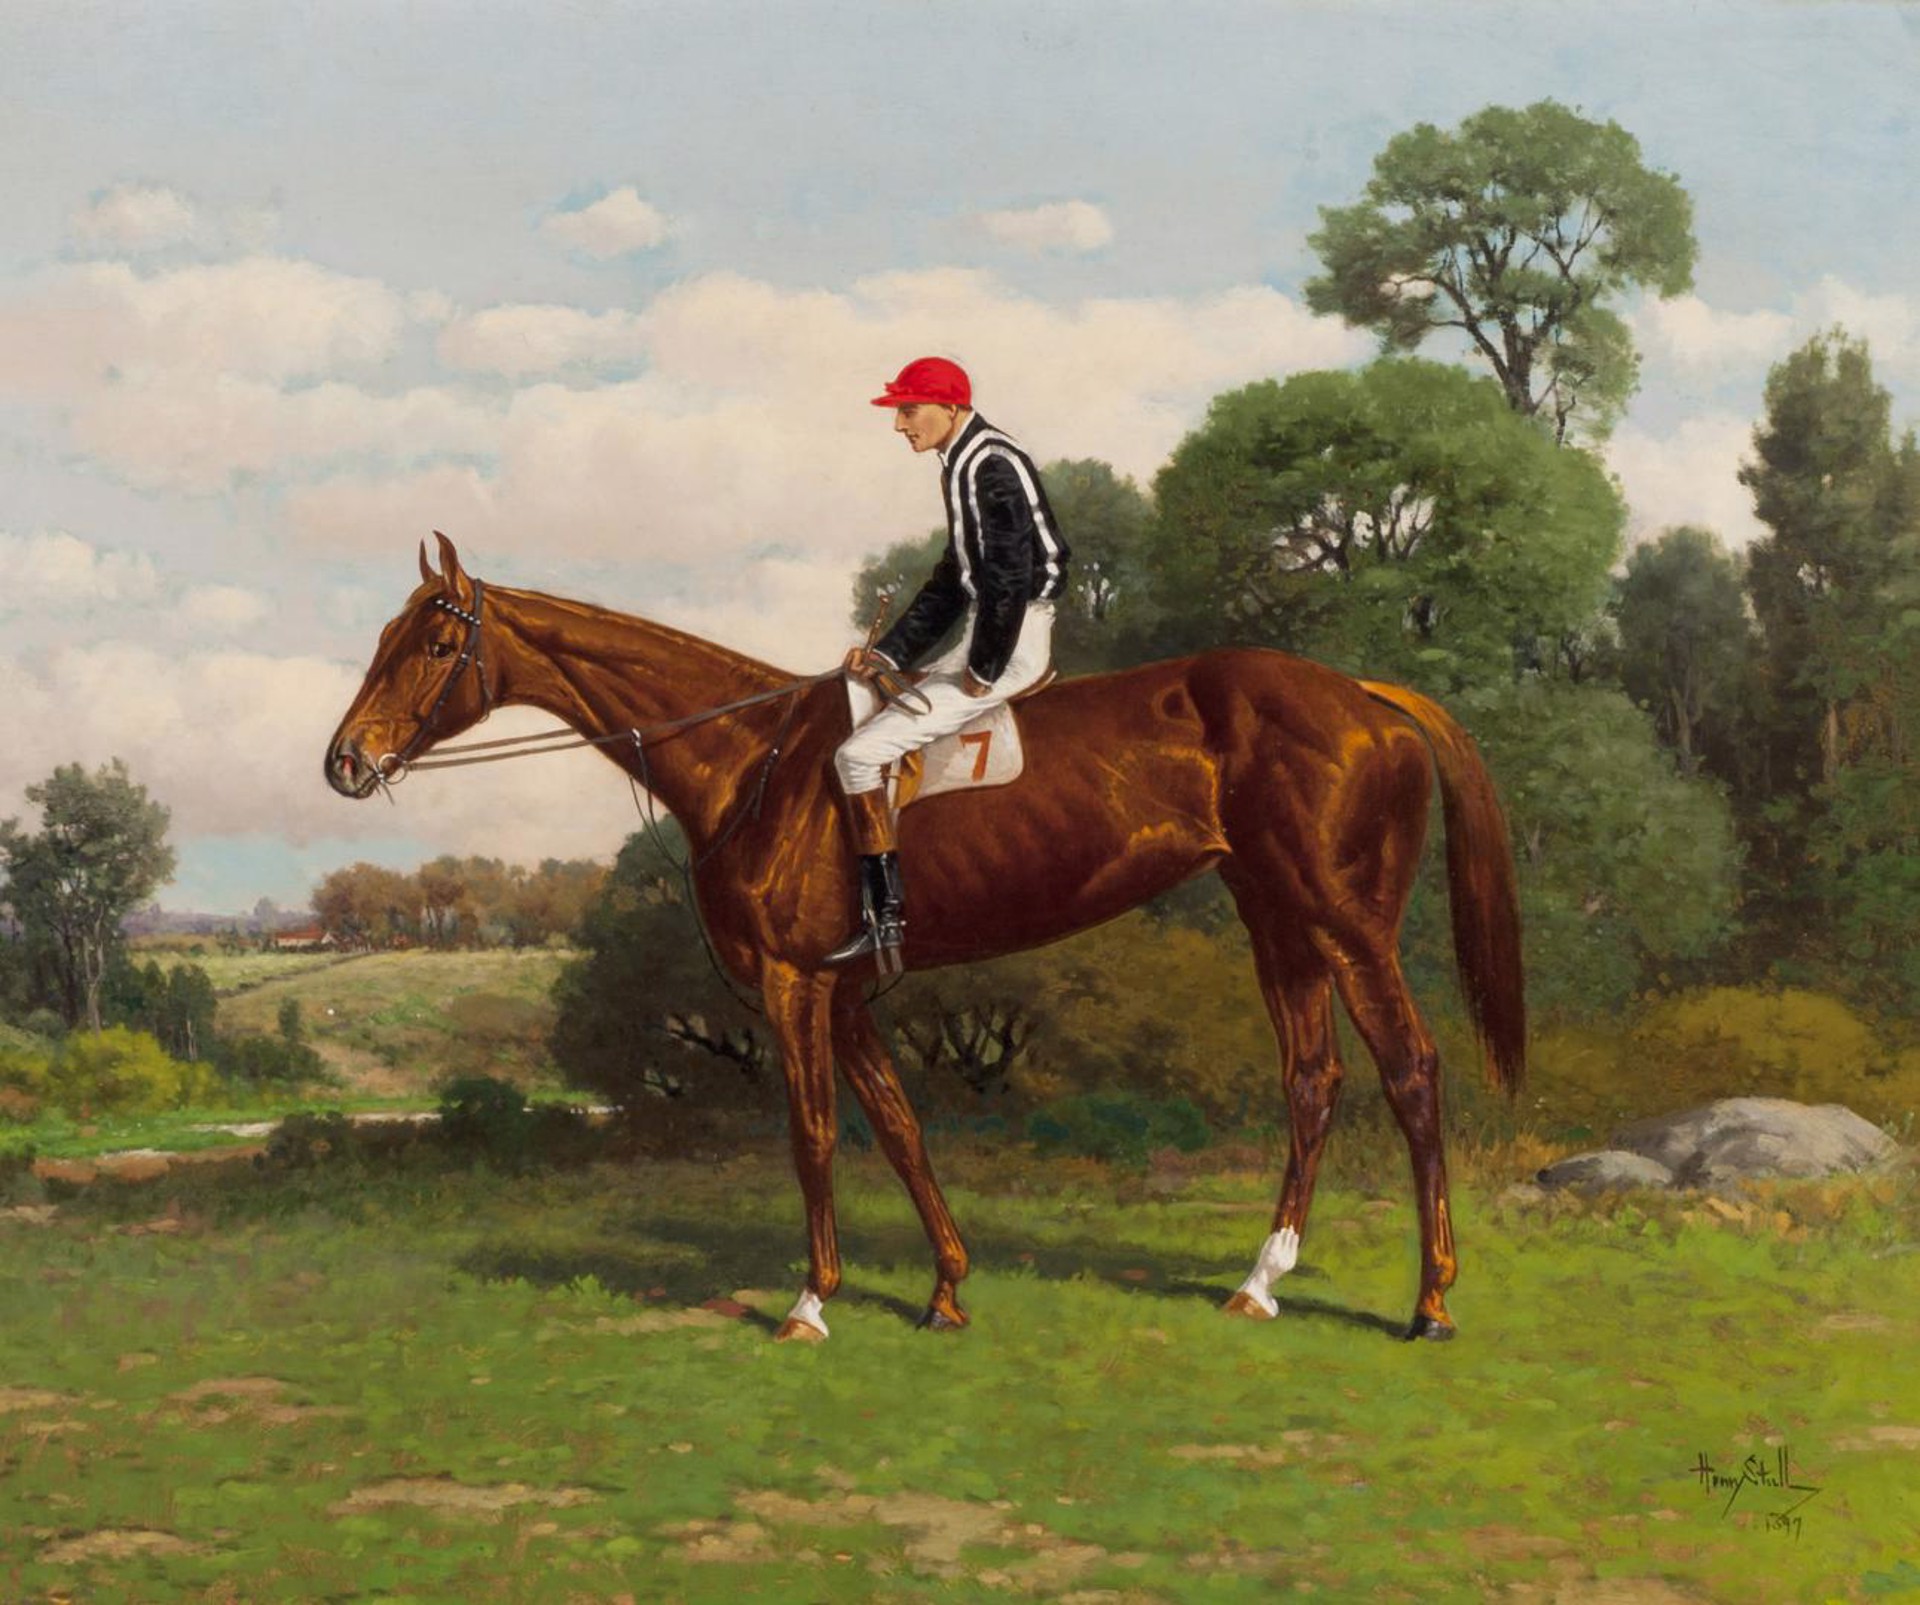 Poetess winner of the Alabama Stakes 1897 by Henry Stull